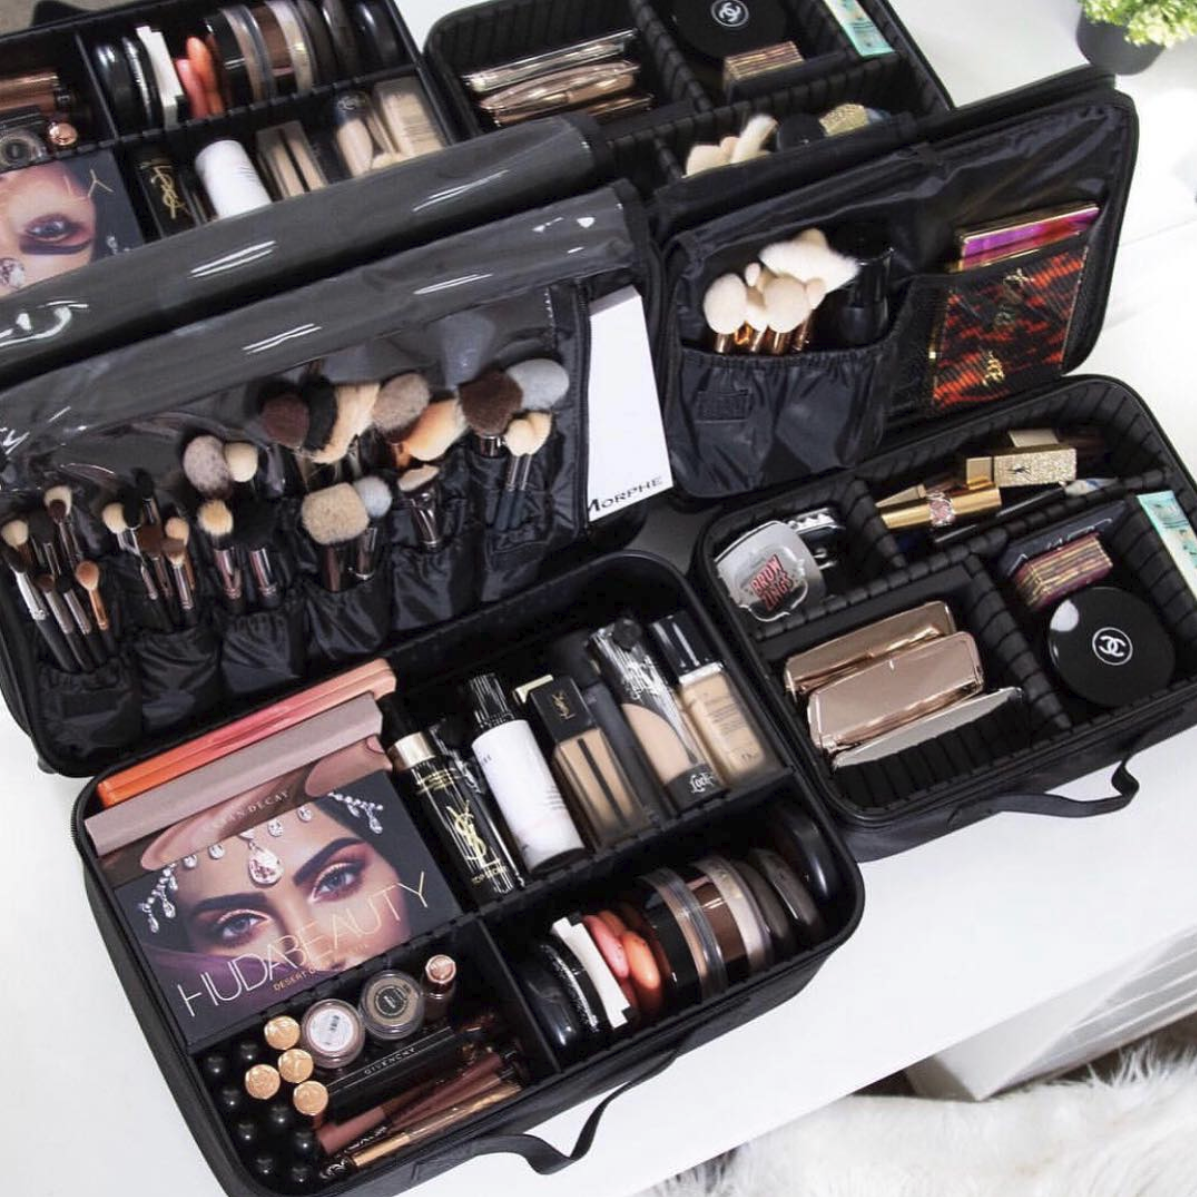 How to best pack makeup for travel?